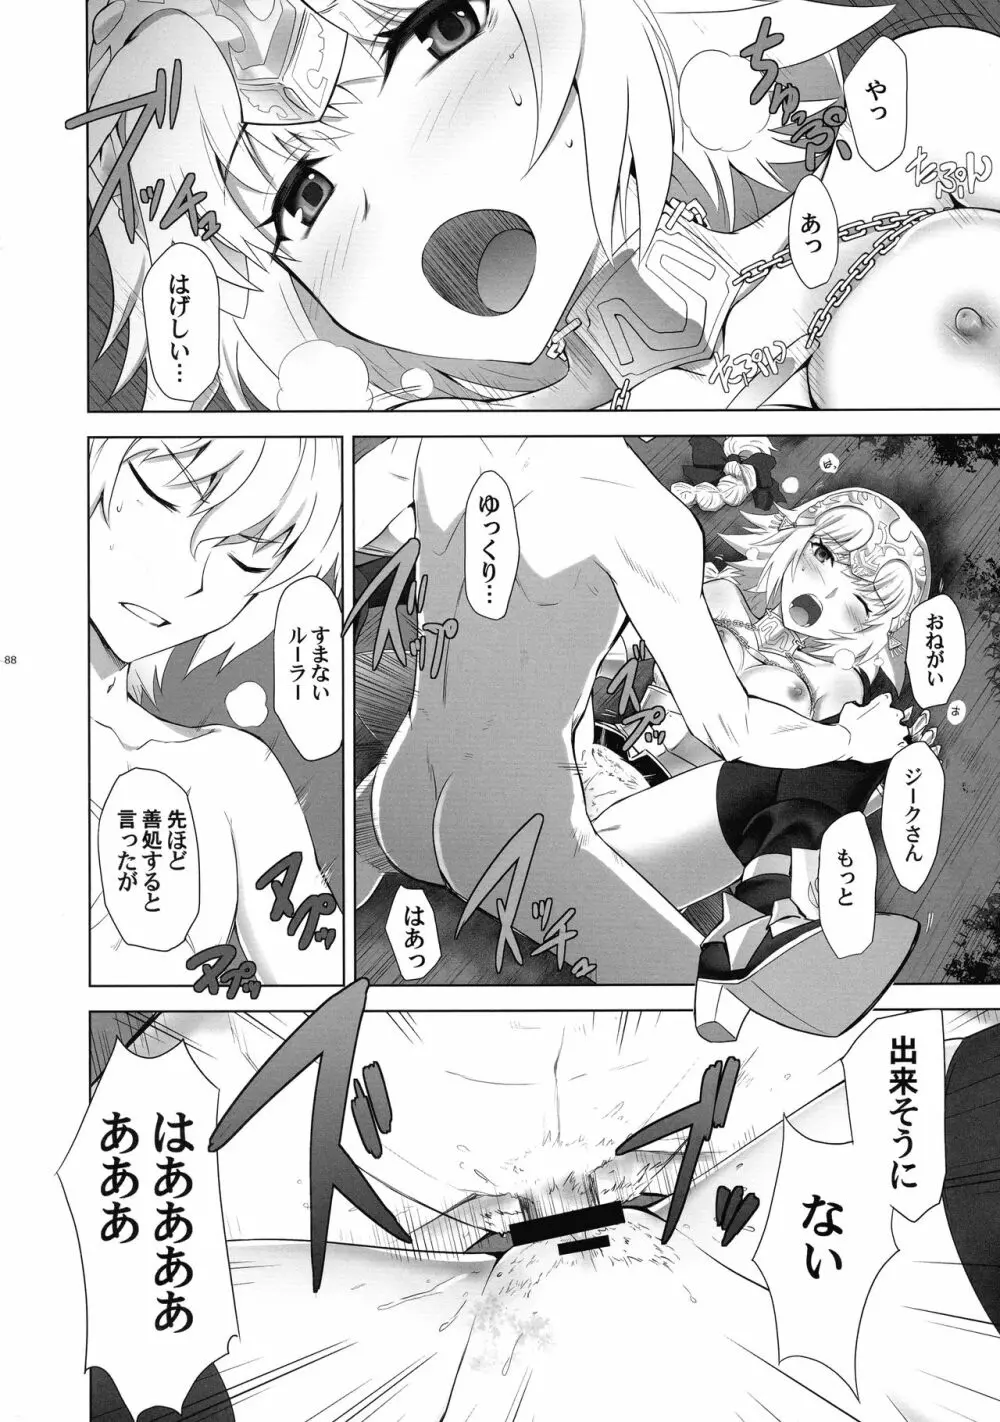 T*MOON COMPLEX R18 総集編 - page87